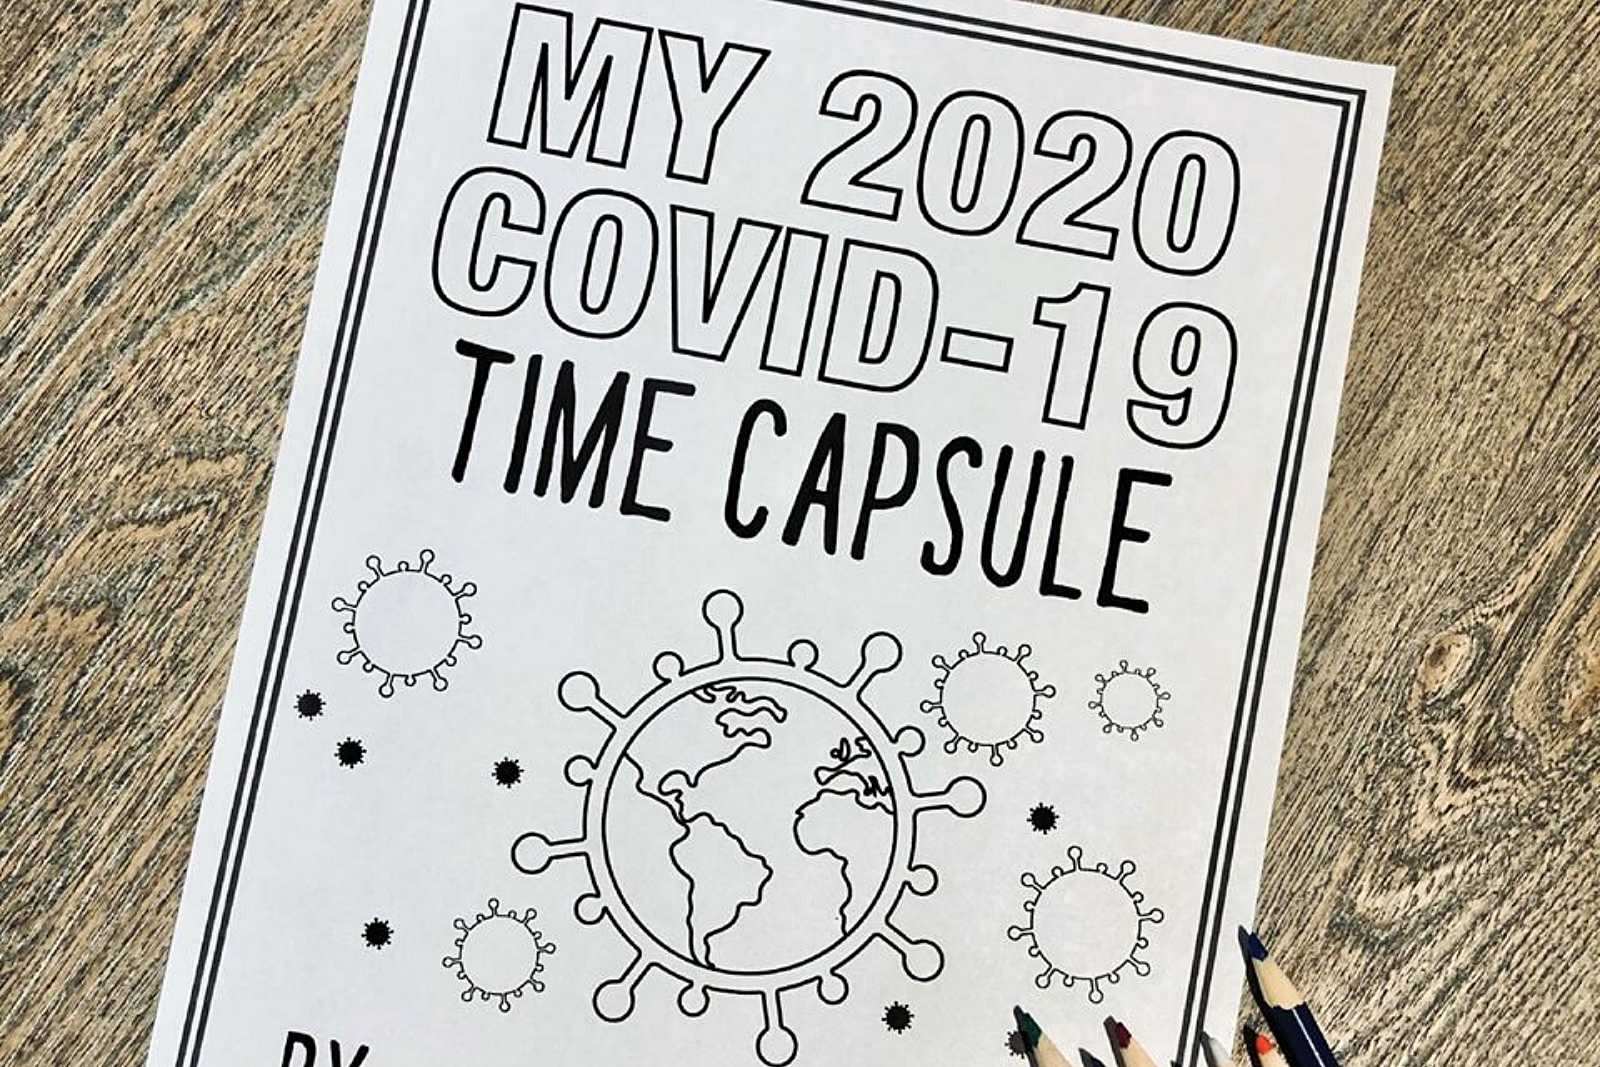 This Time Capsule Engages Kids Records Experiences During Pandemic Scoonews Com